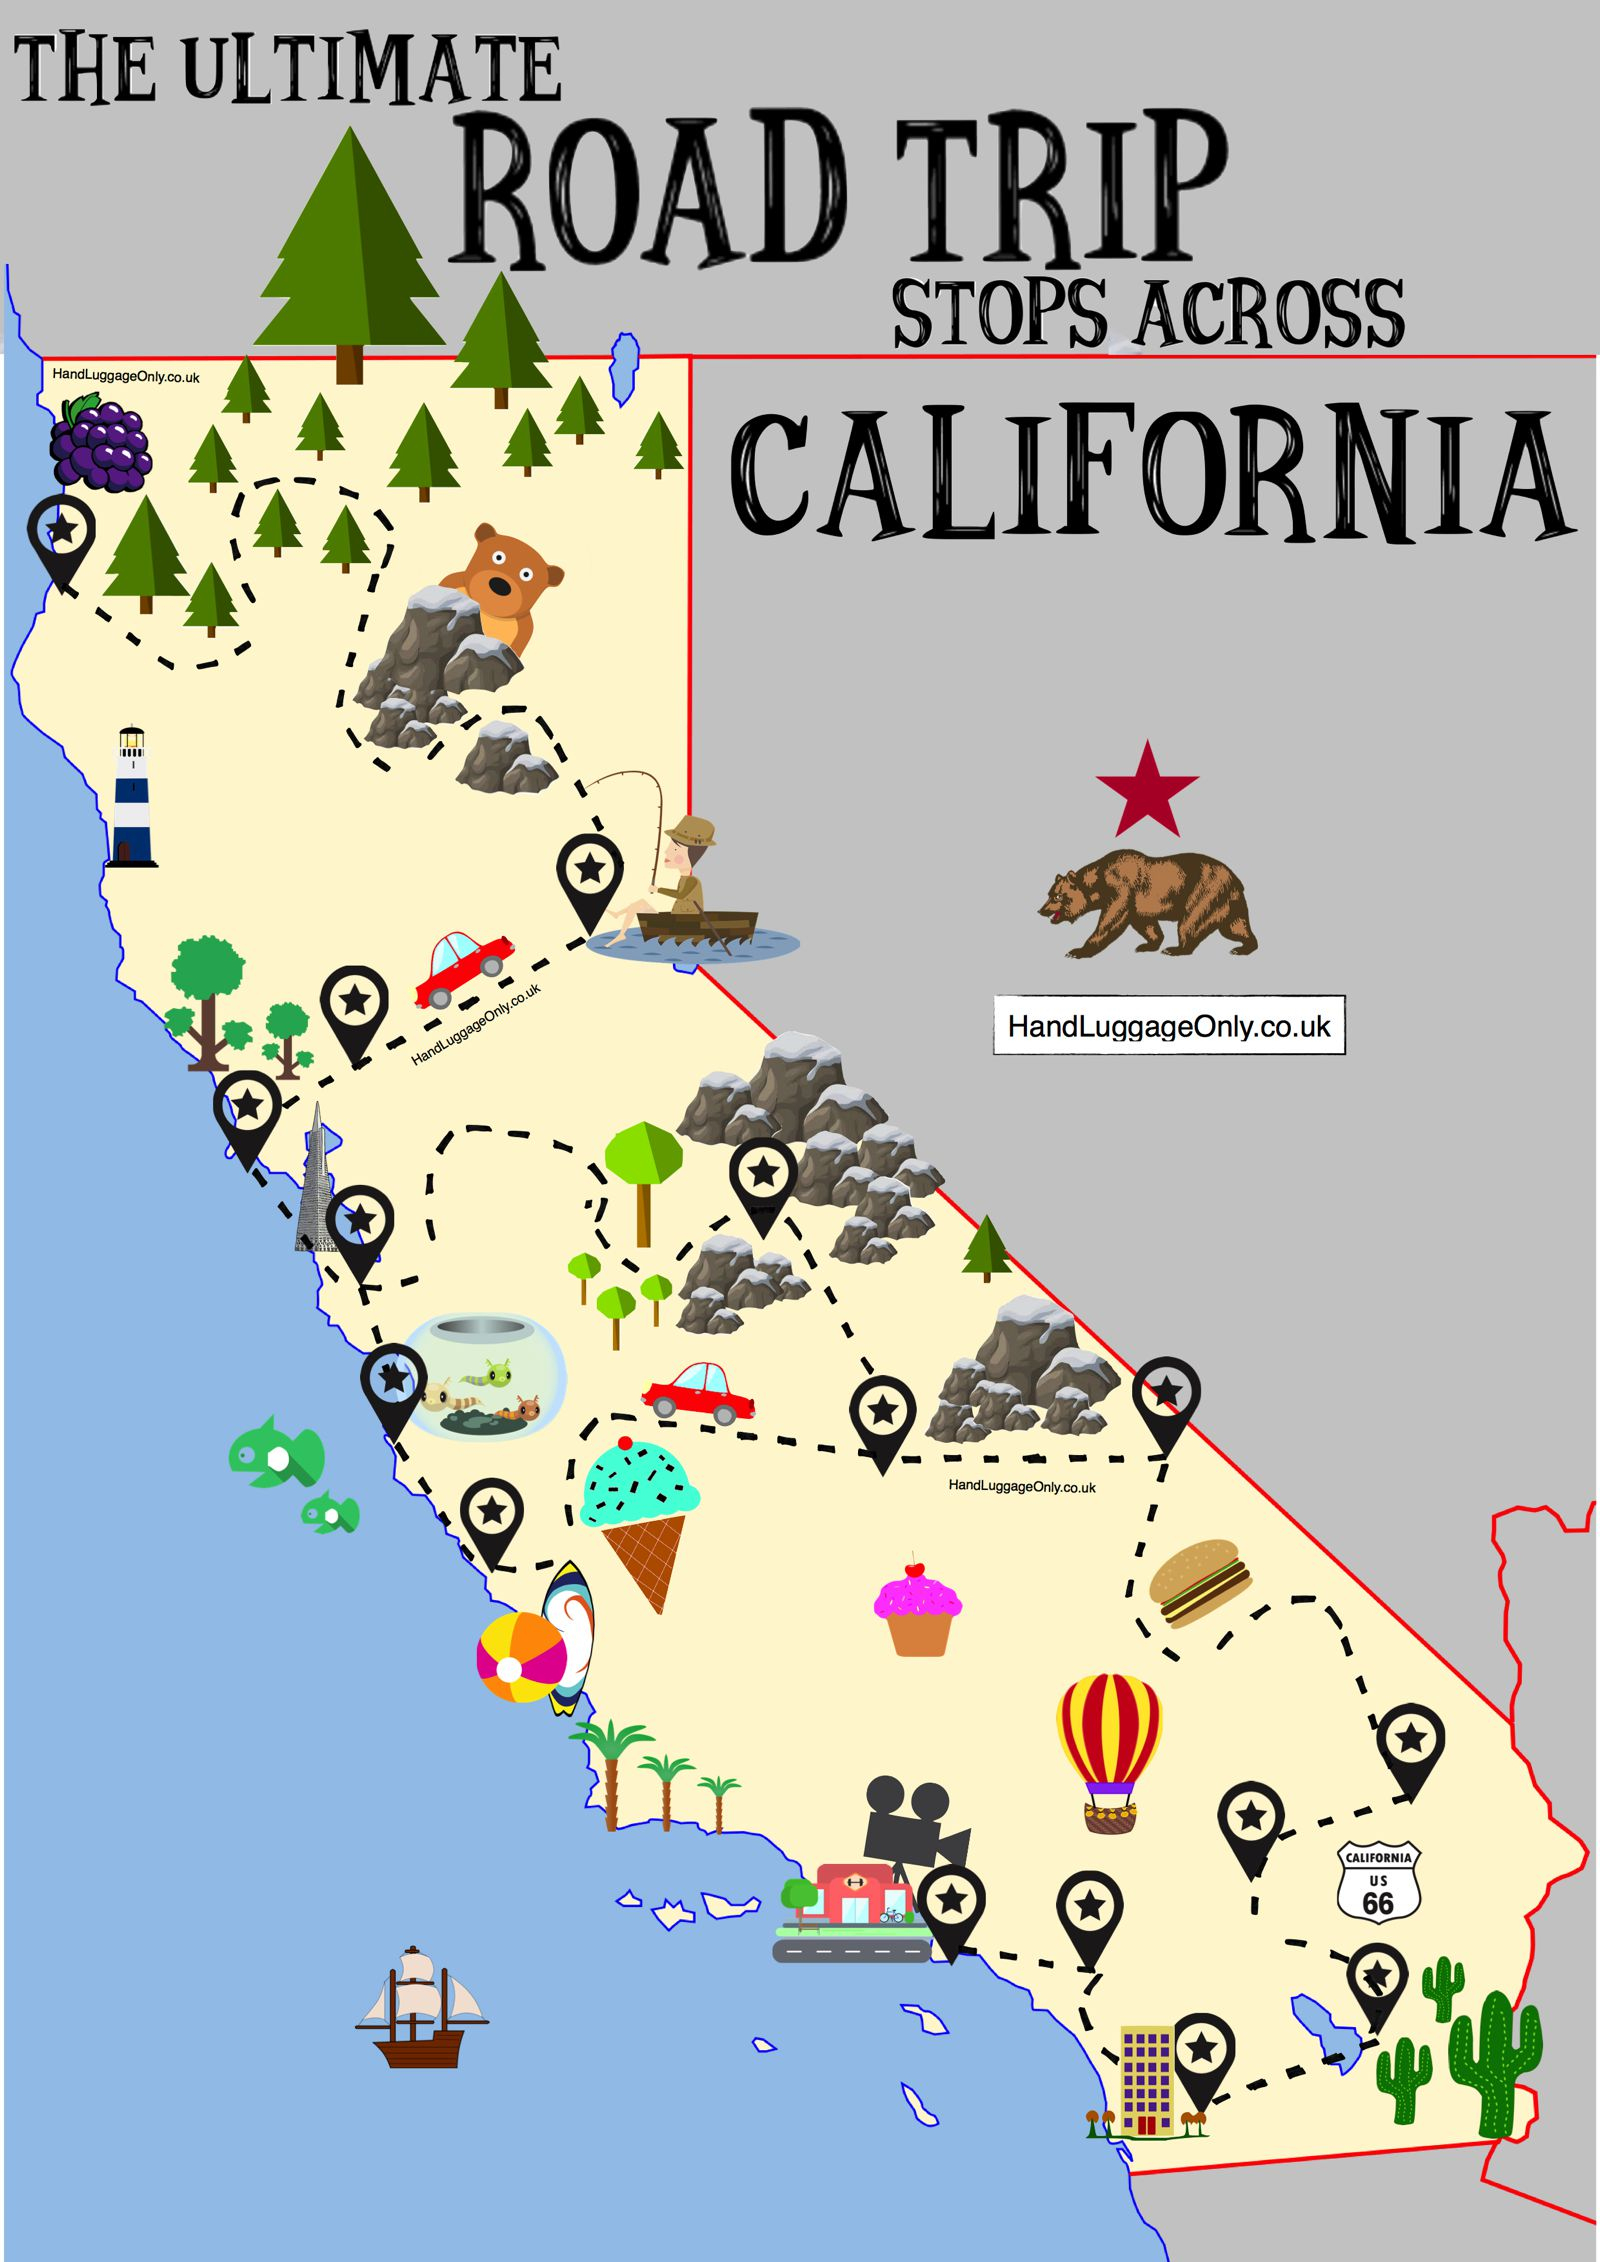 The Ultimate Road Trip Map Of Places To Visit In California - Hand - Route 66 Map California